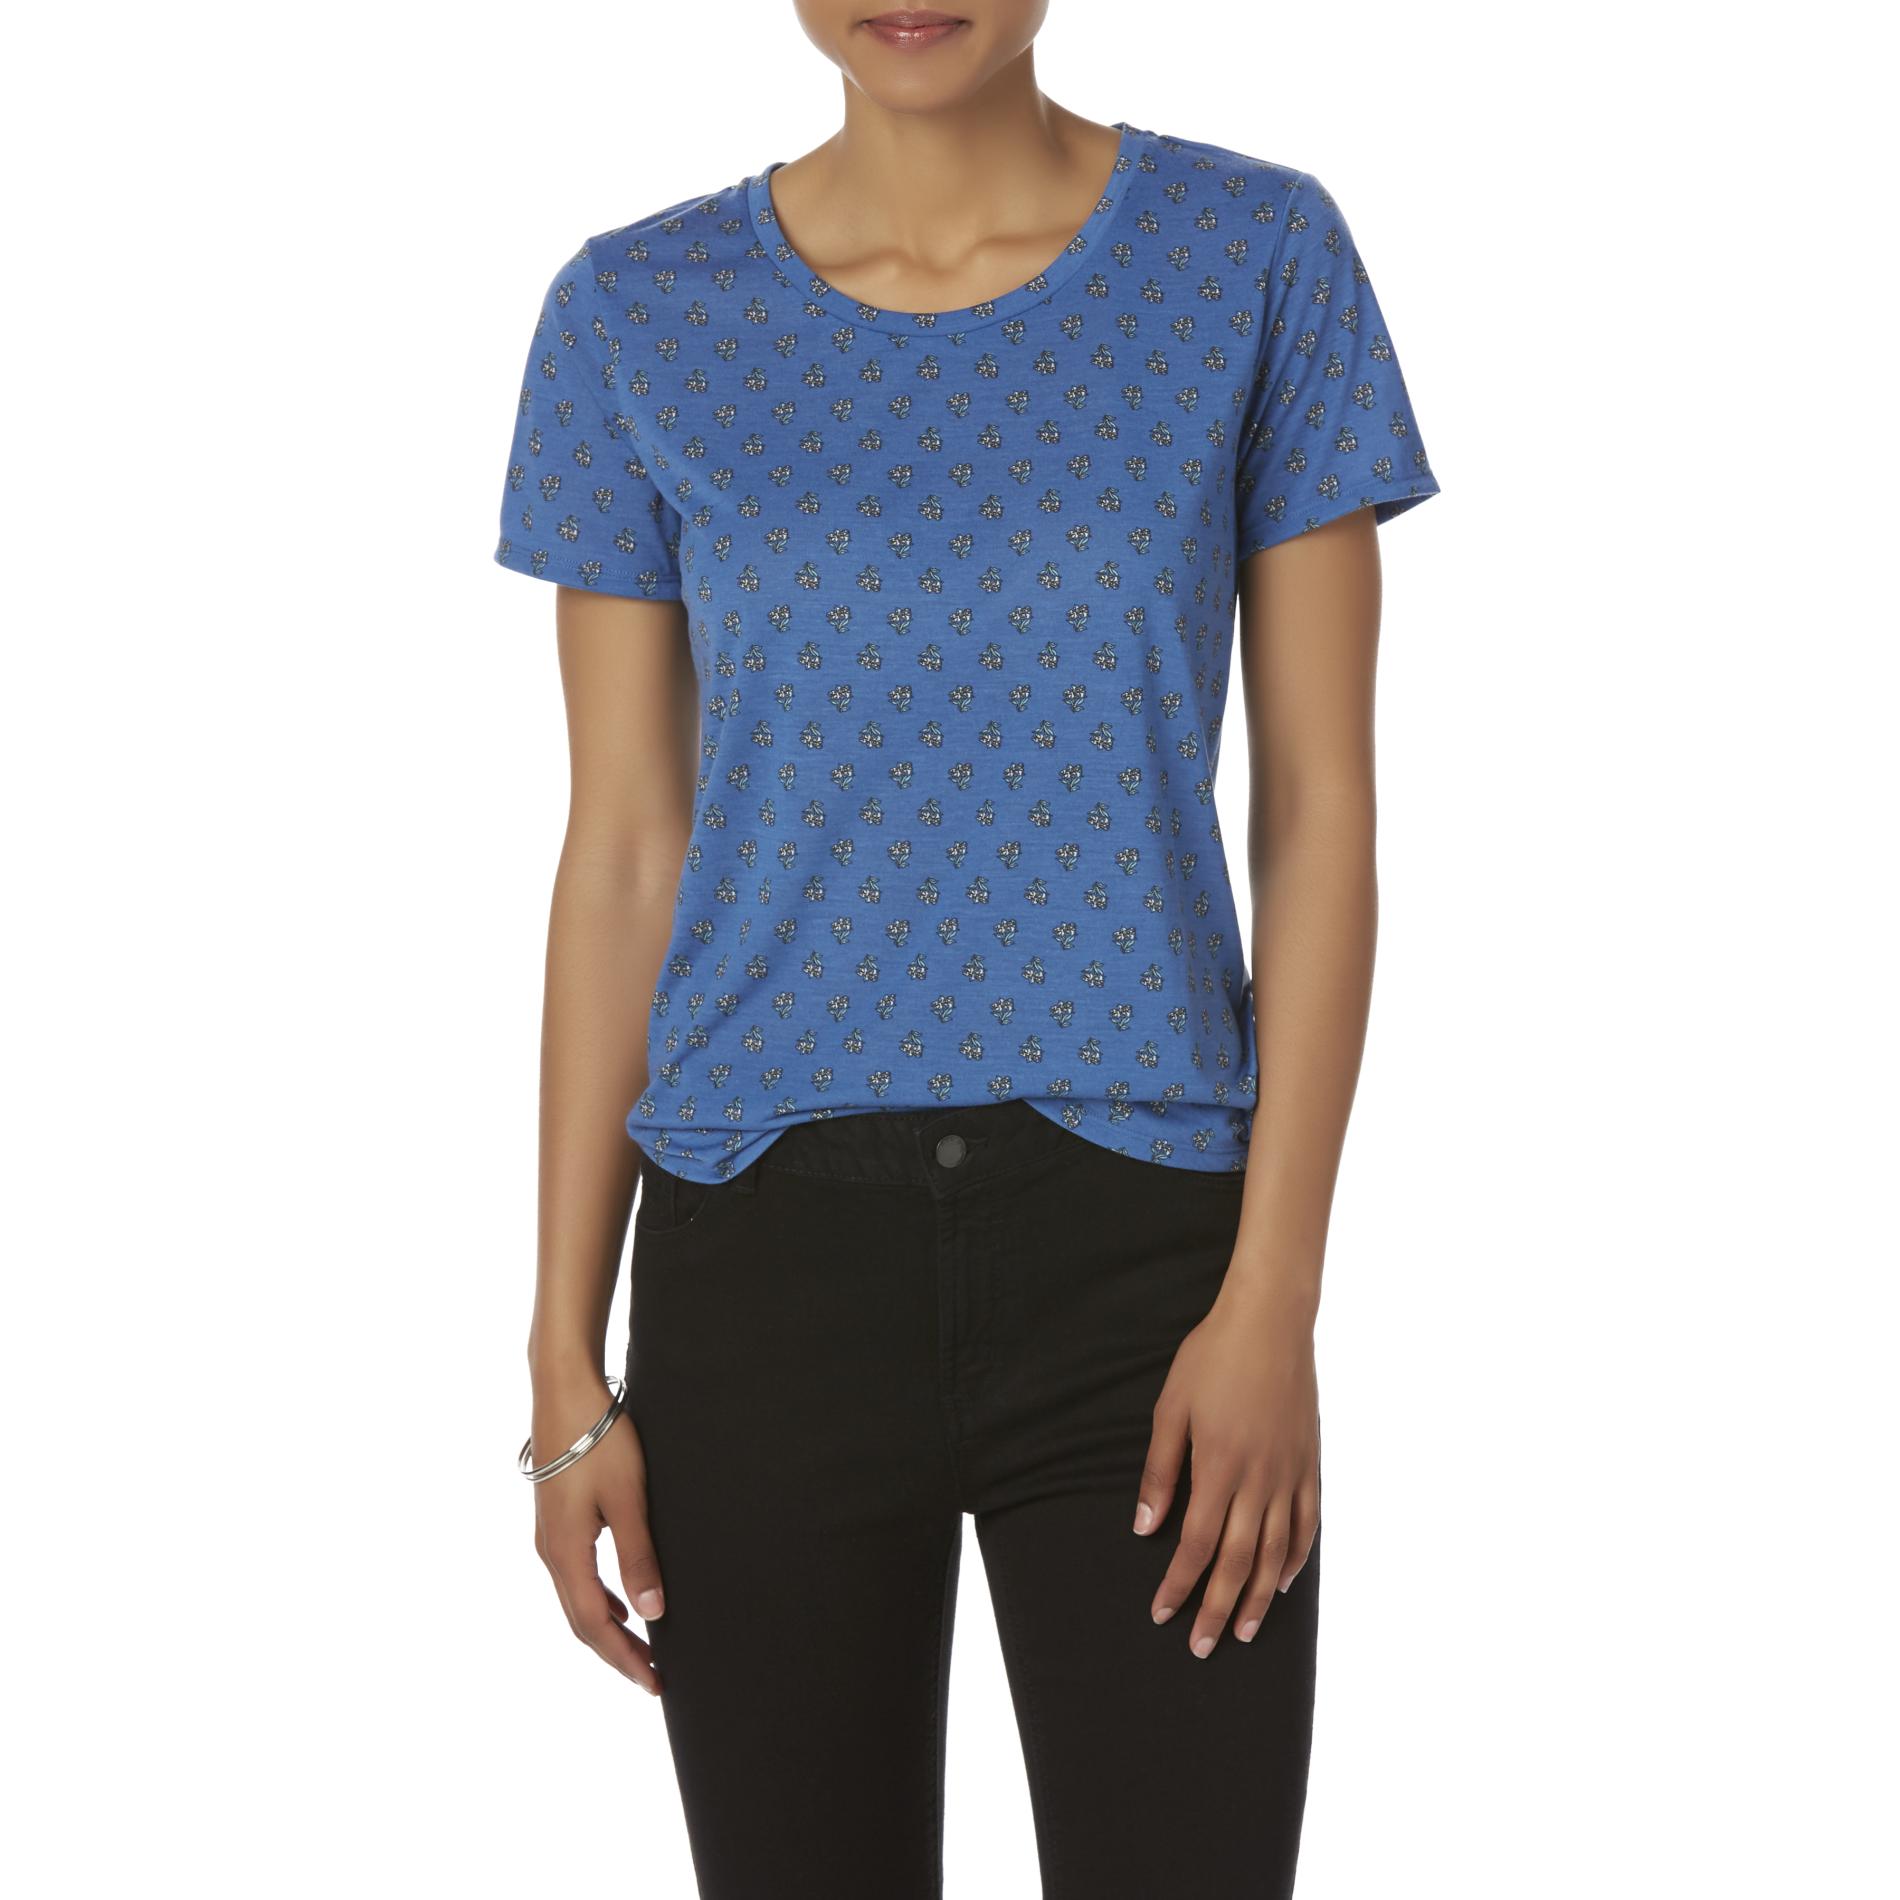 Simply Styled Women's Graphic T-Shirt - Floral